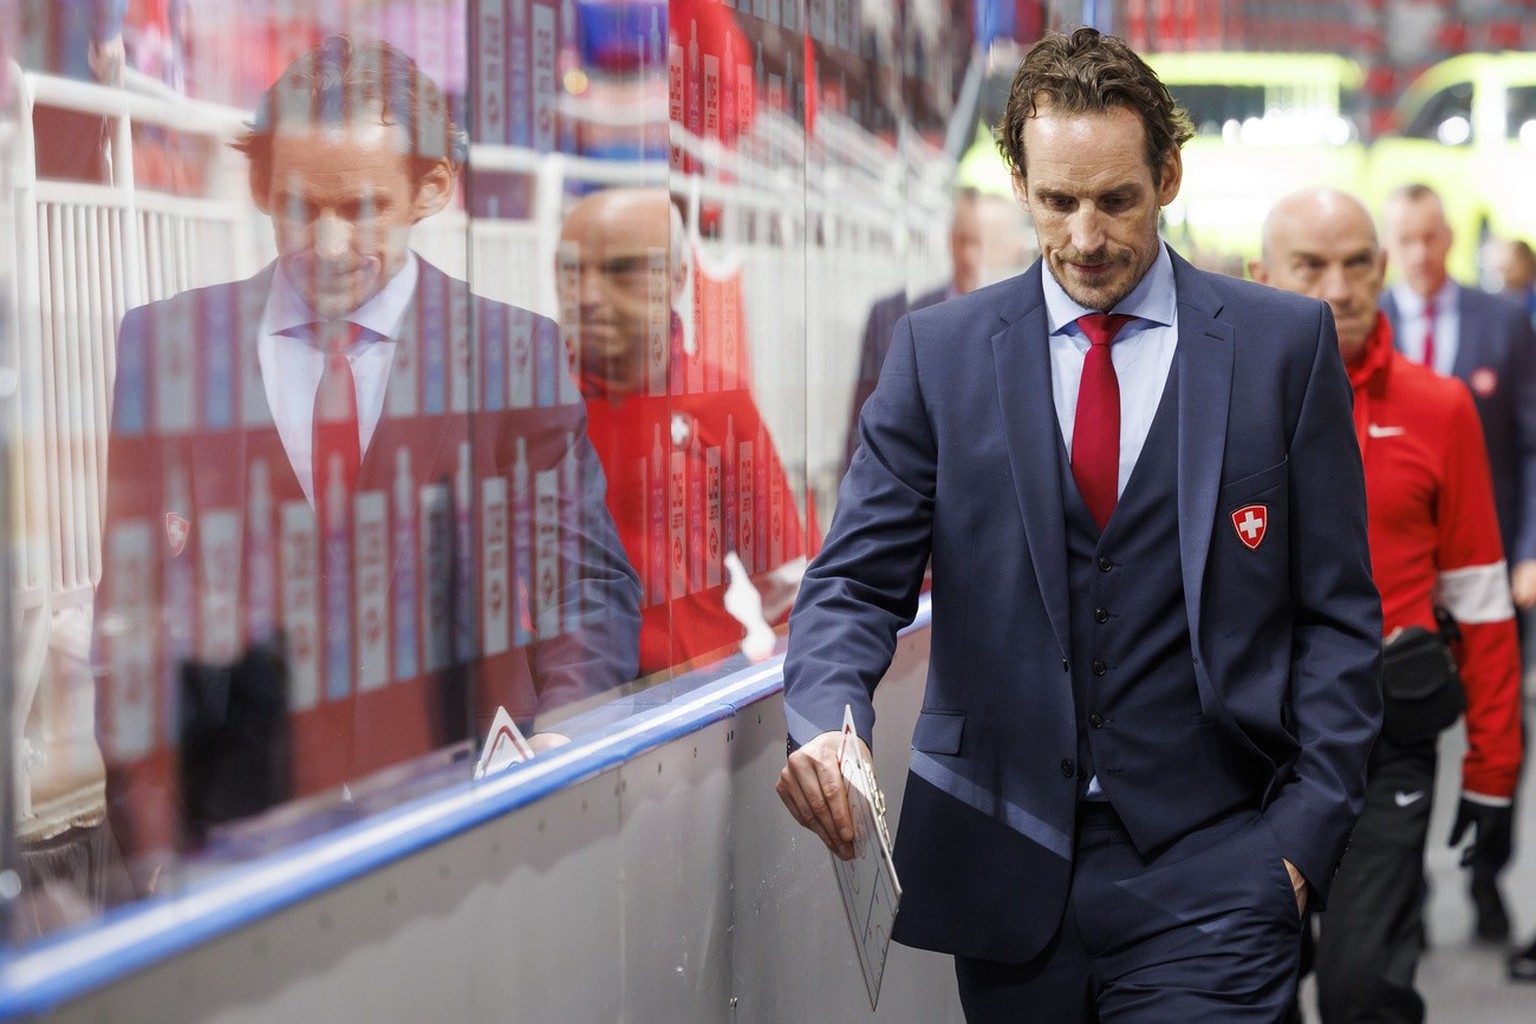 Patrick Fischer, head coach of Switzerland national ice hockey team, returns to cloak room, during the IIHF 2023 World Championship preliminary round group B game between Norway and Switzerland, at th ...